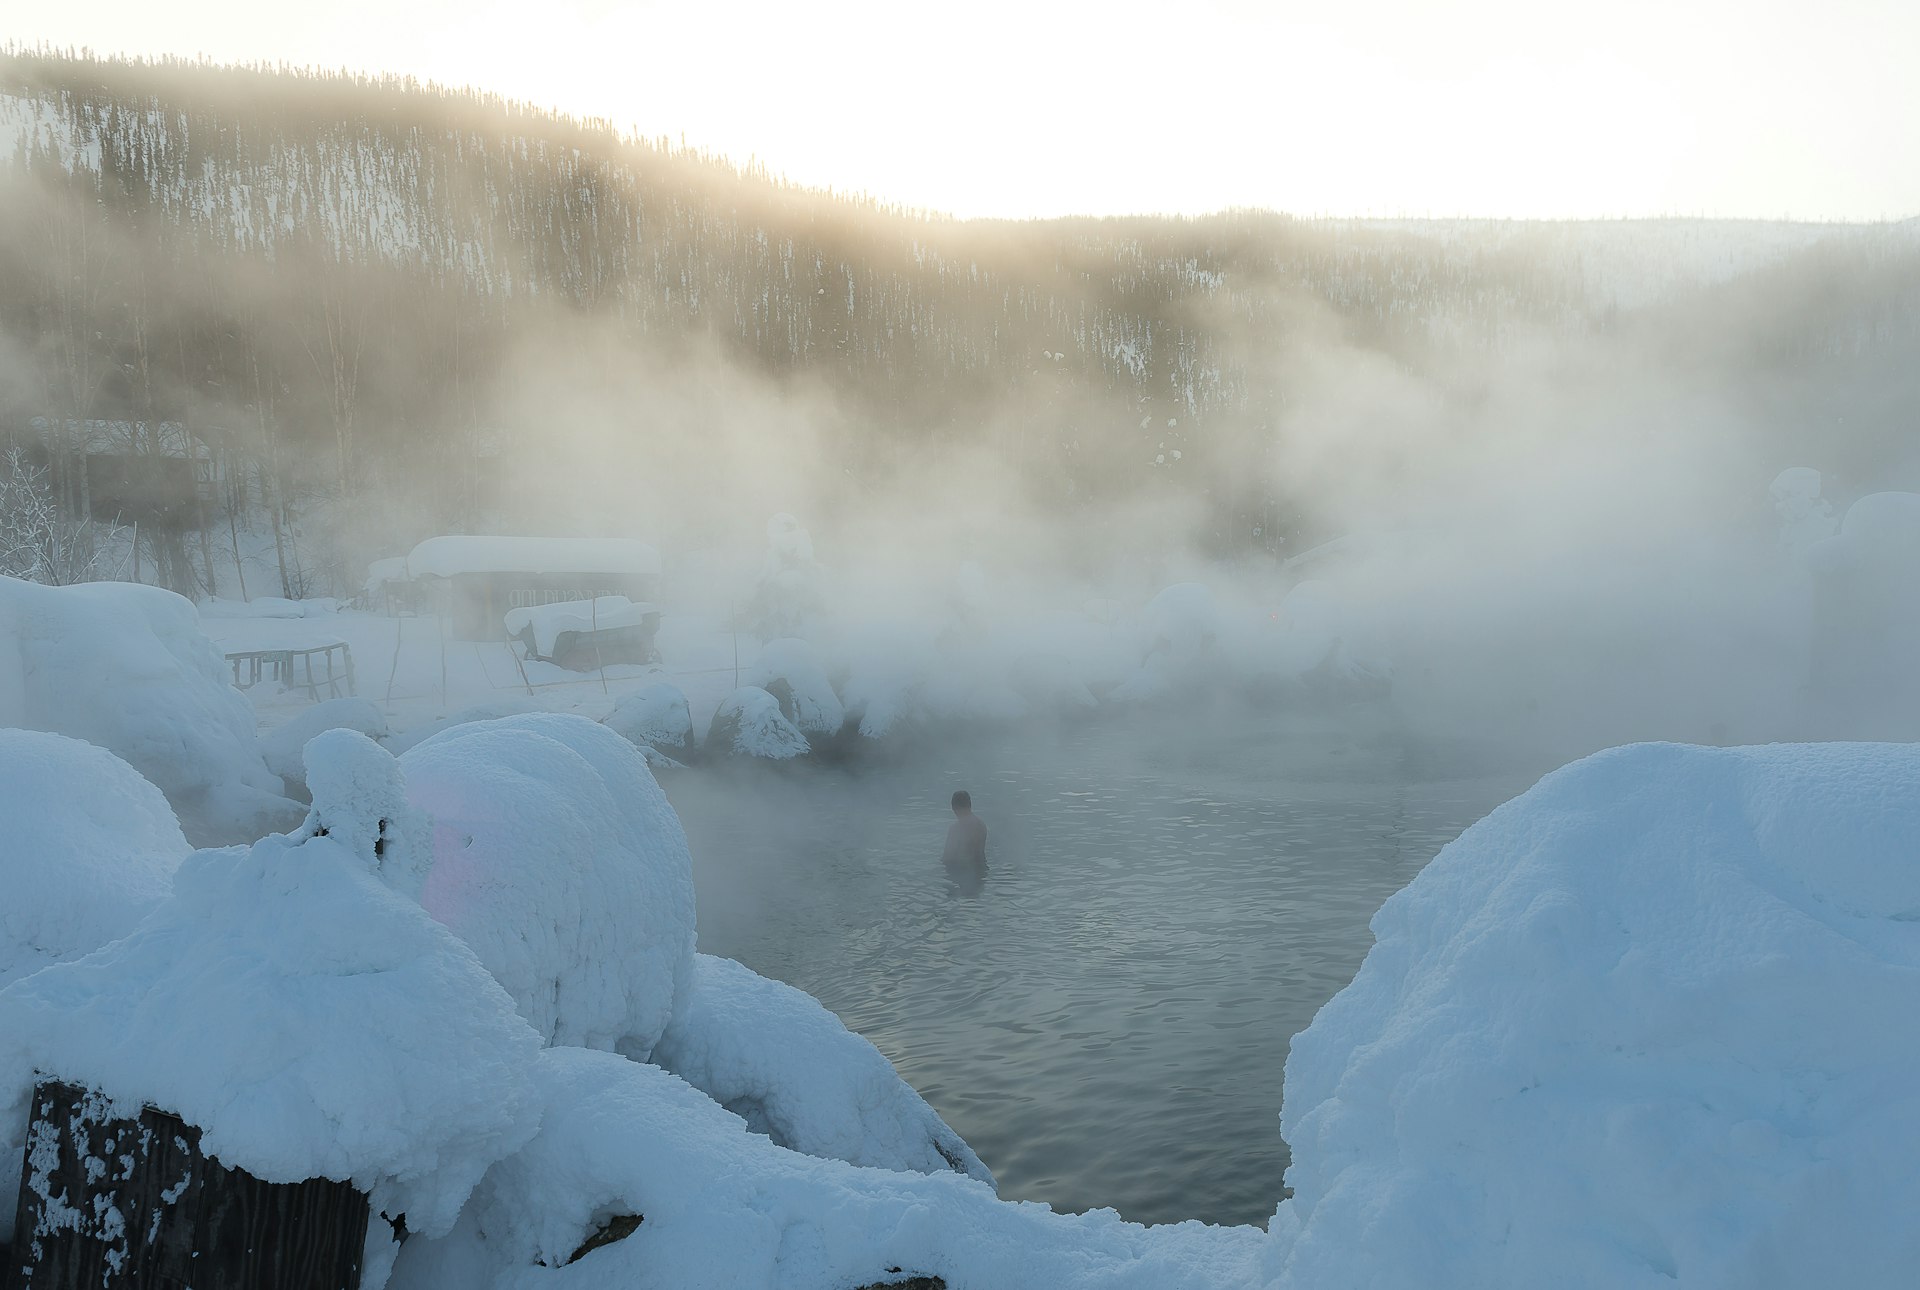 Bathers enjoying the Chena Hot Spring on the top of mountain during winter in Alaska